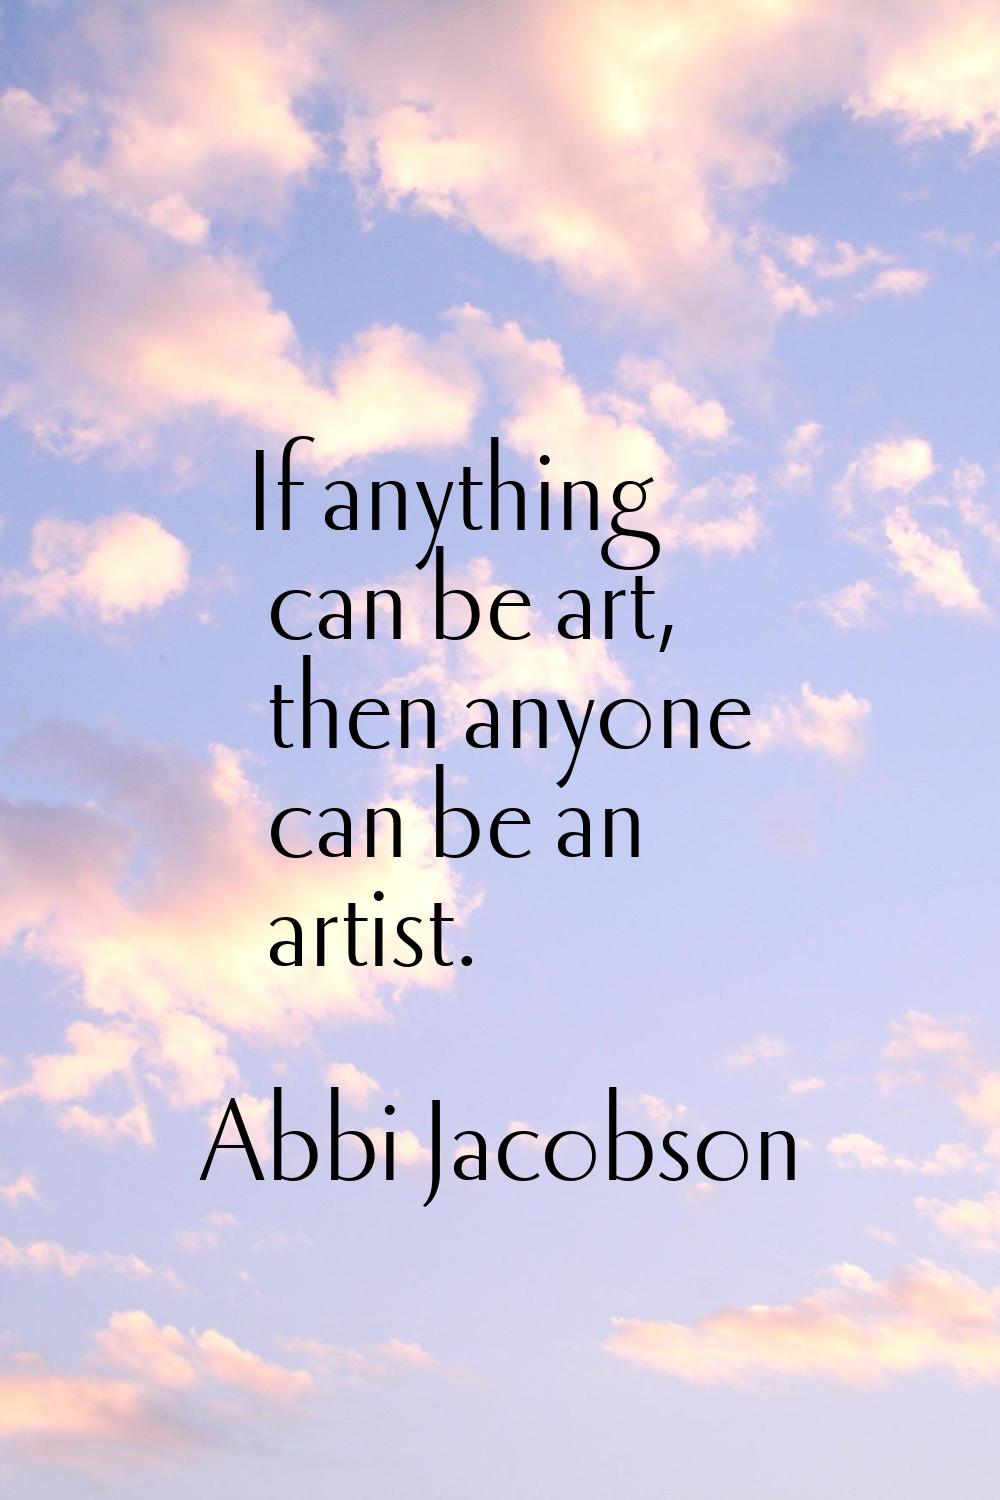 If anything can be art, then anyone can be an artist.